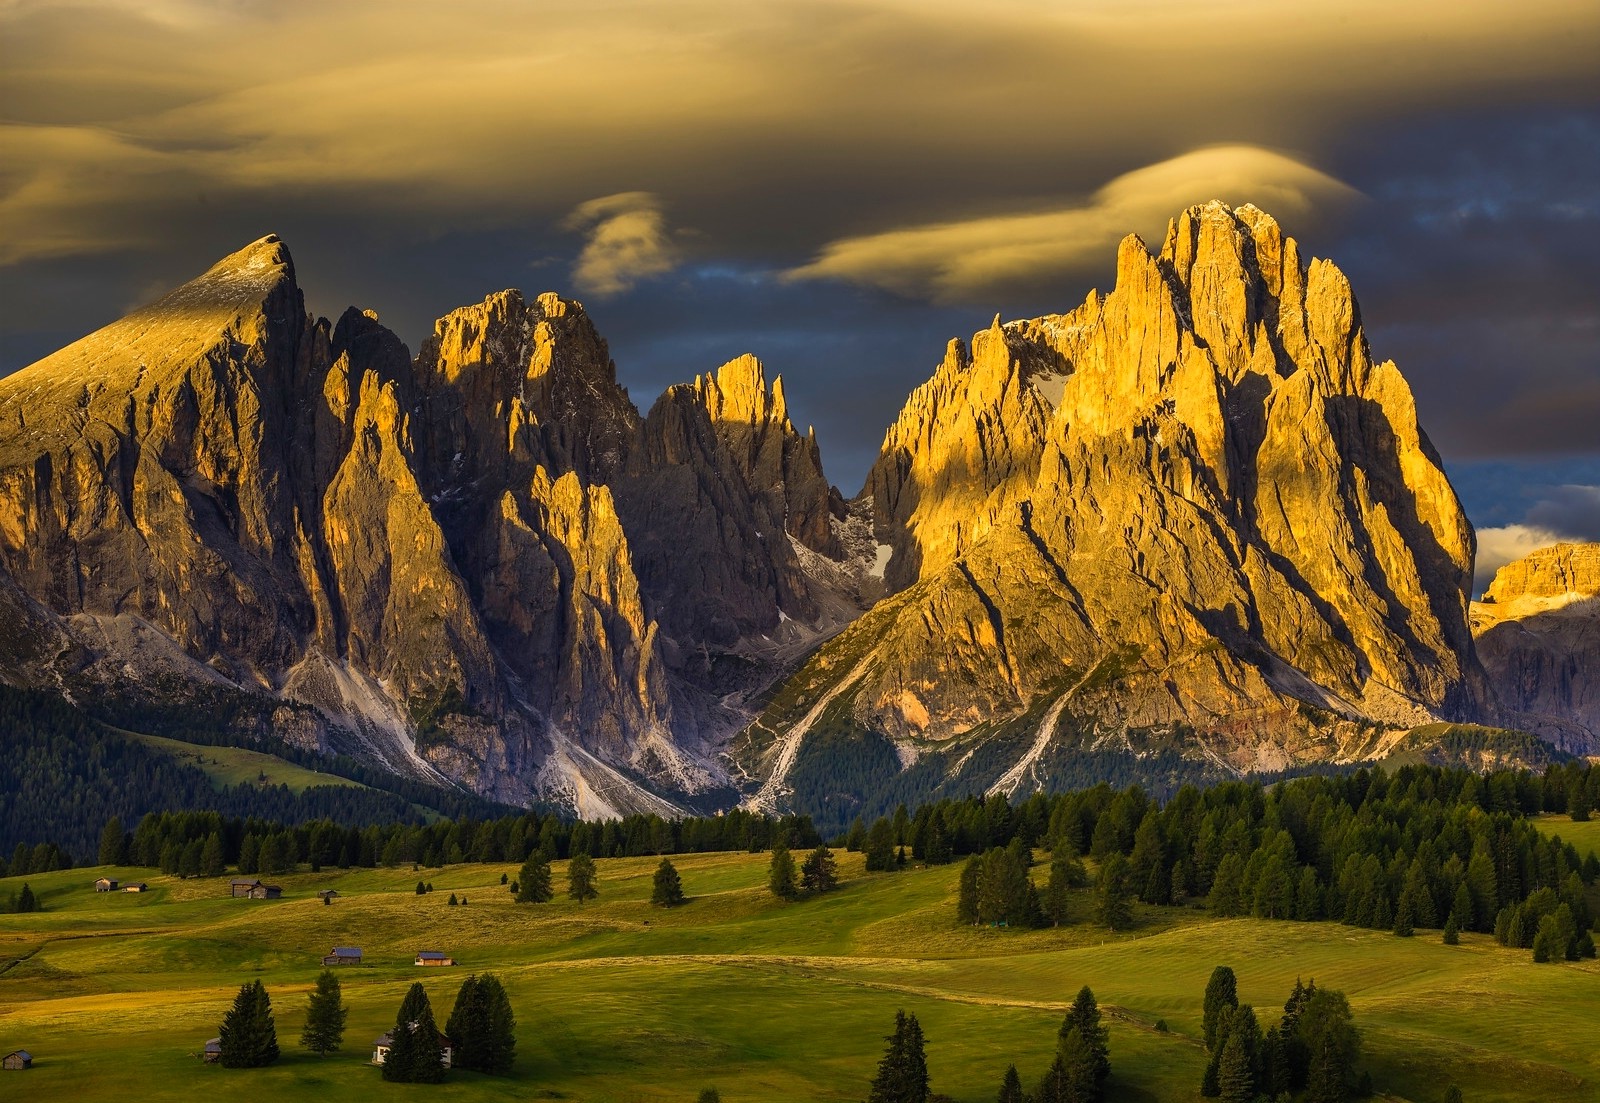 Alps Mountain Hd Wallpaper Free Download | Wallpapers Area